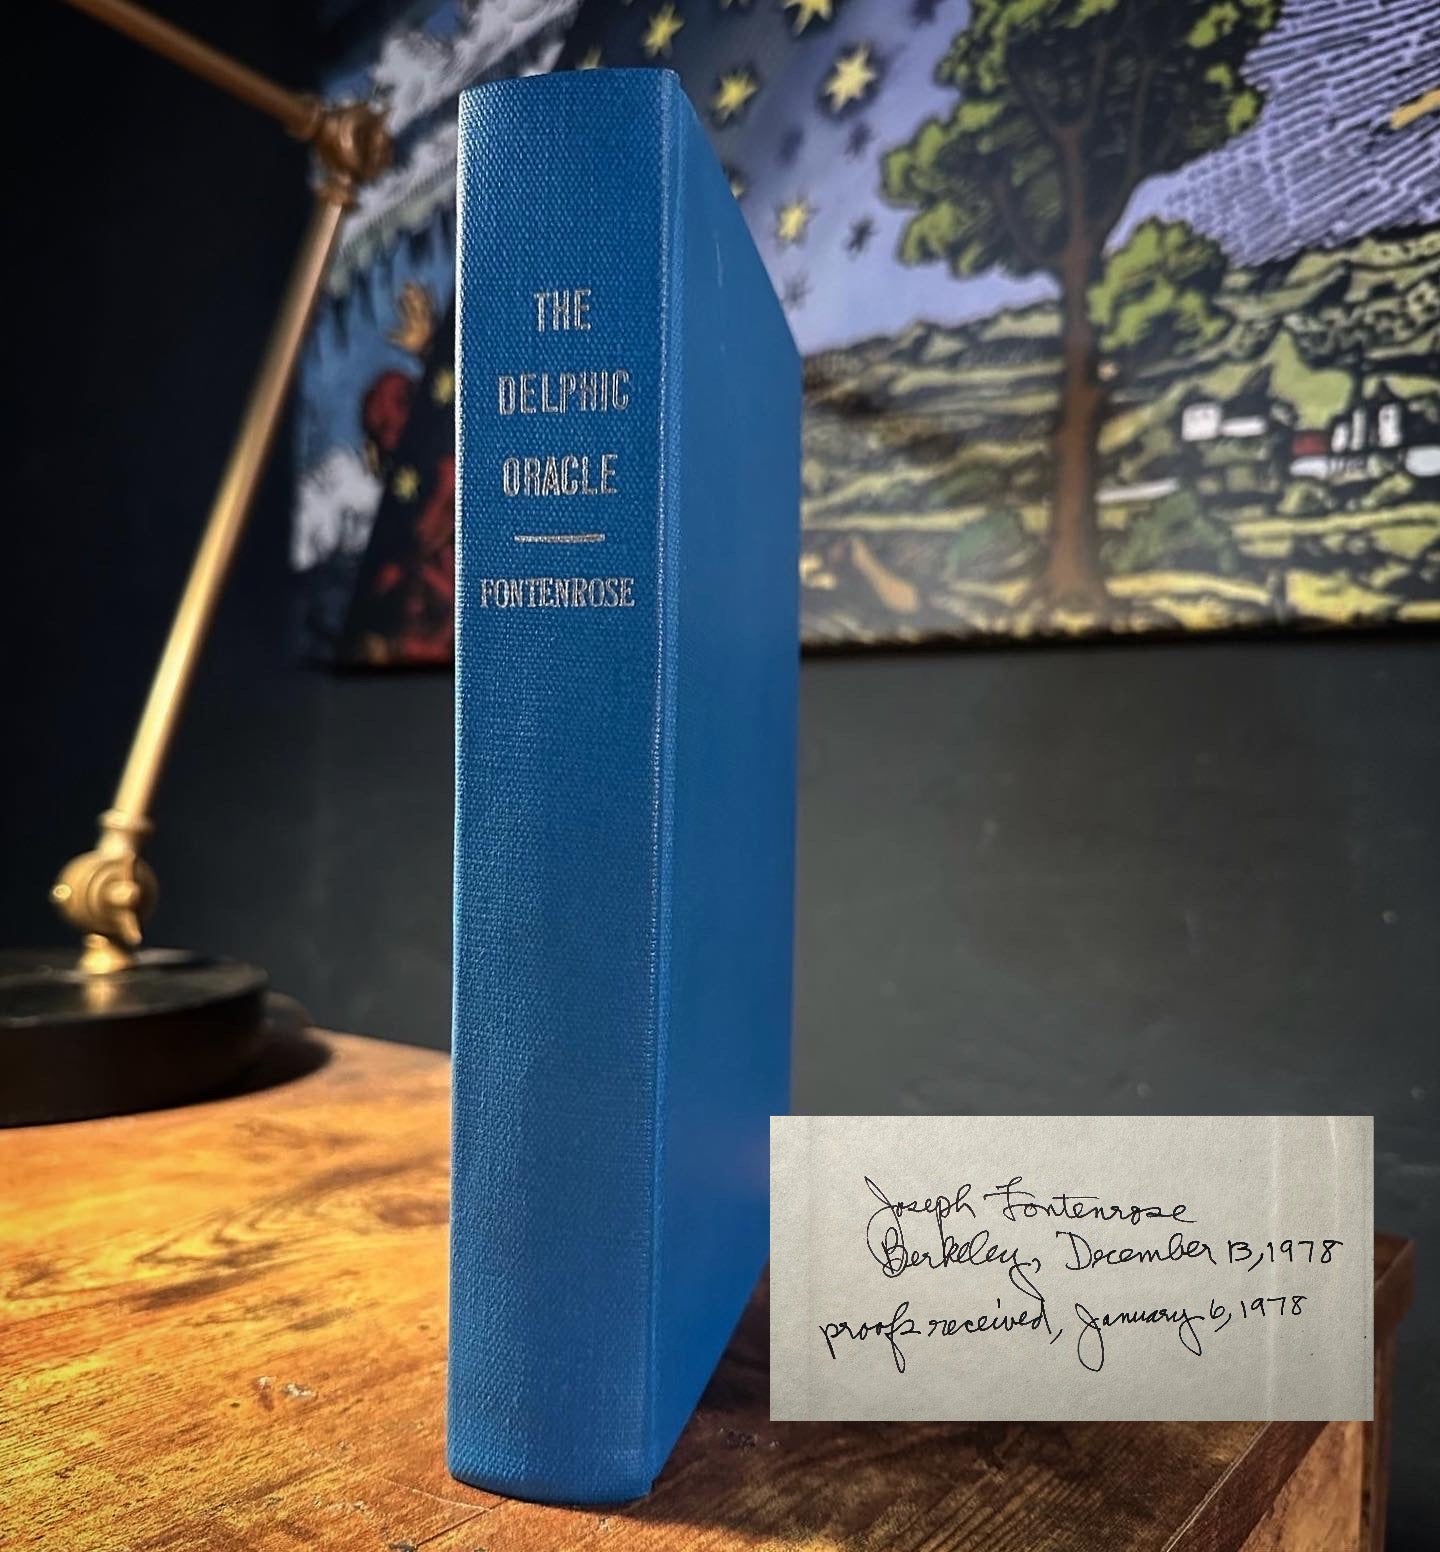 The Delphic Oracle (Proof Copy) Signed by Joseph Fontenrose